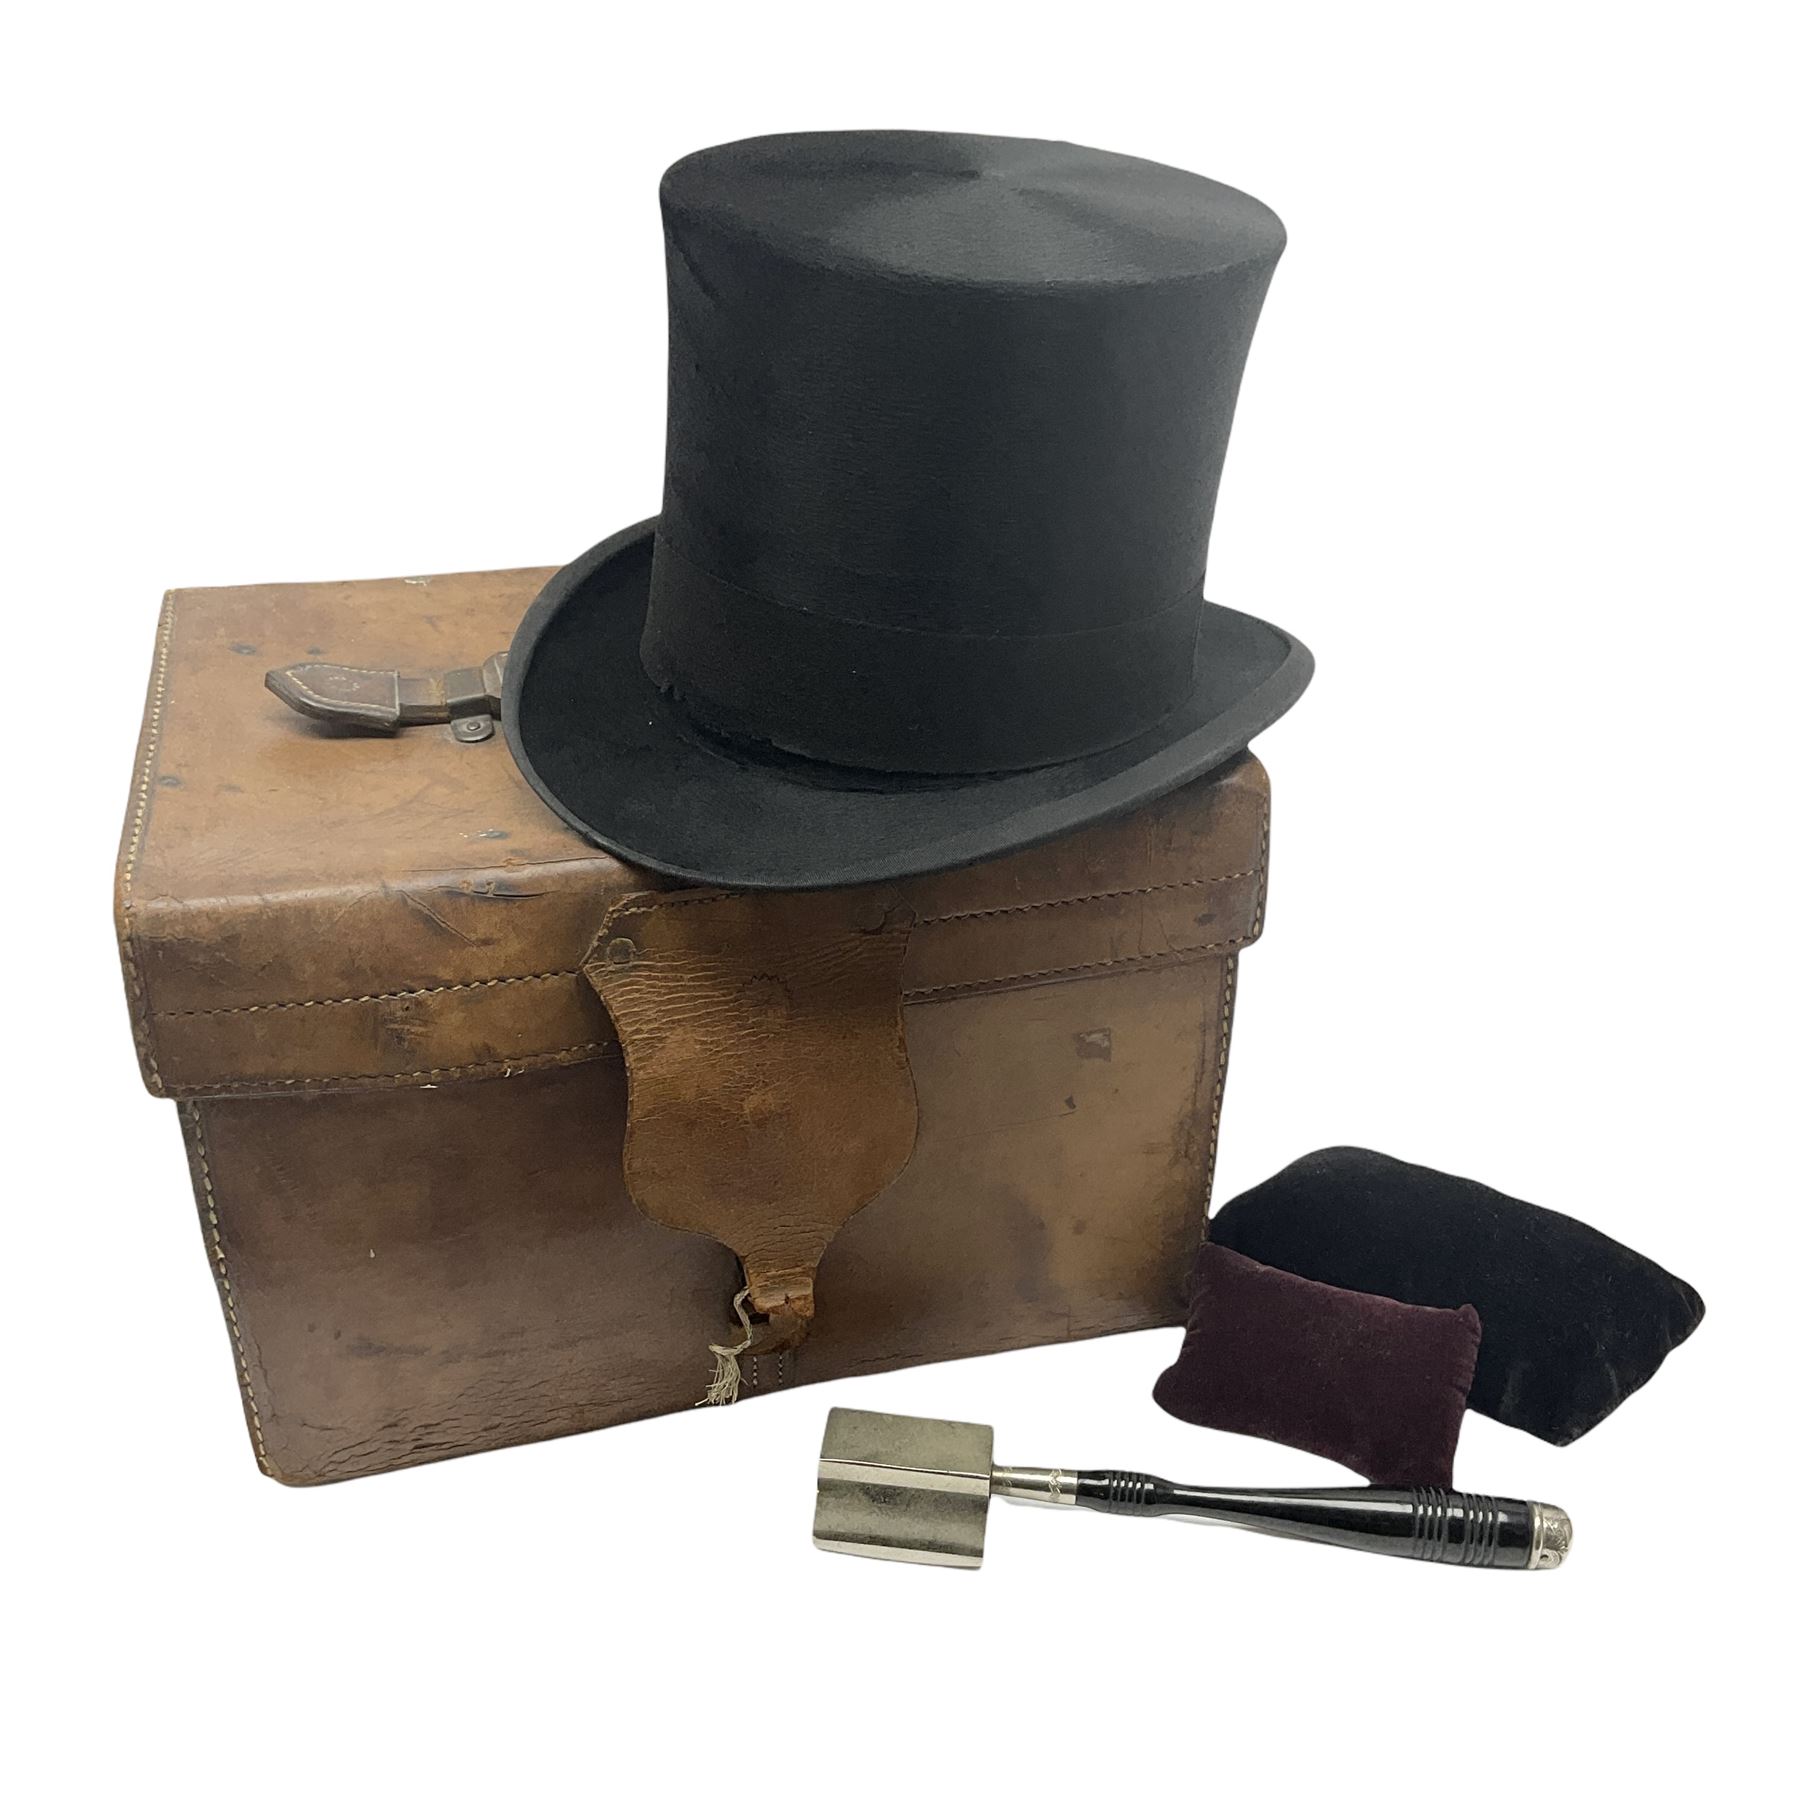 Gentlemen's black brushed silk top hat by Henry Heath of London housed in a leather case with dark r